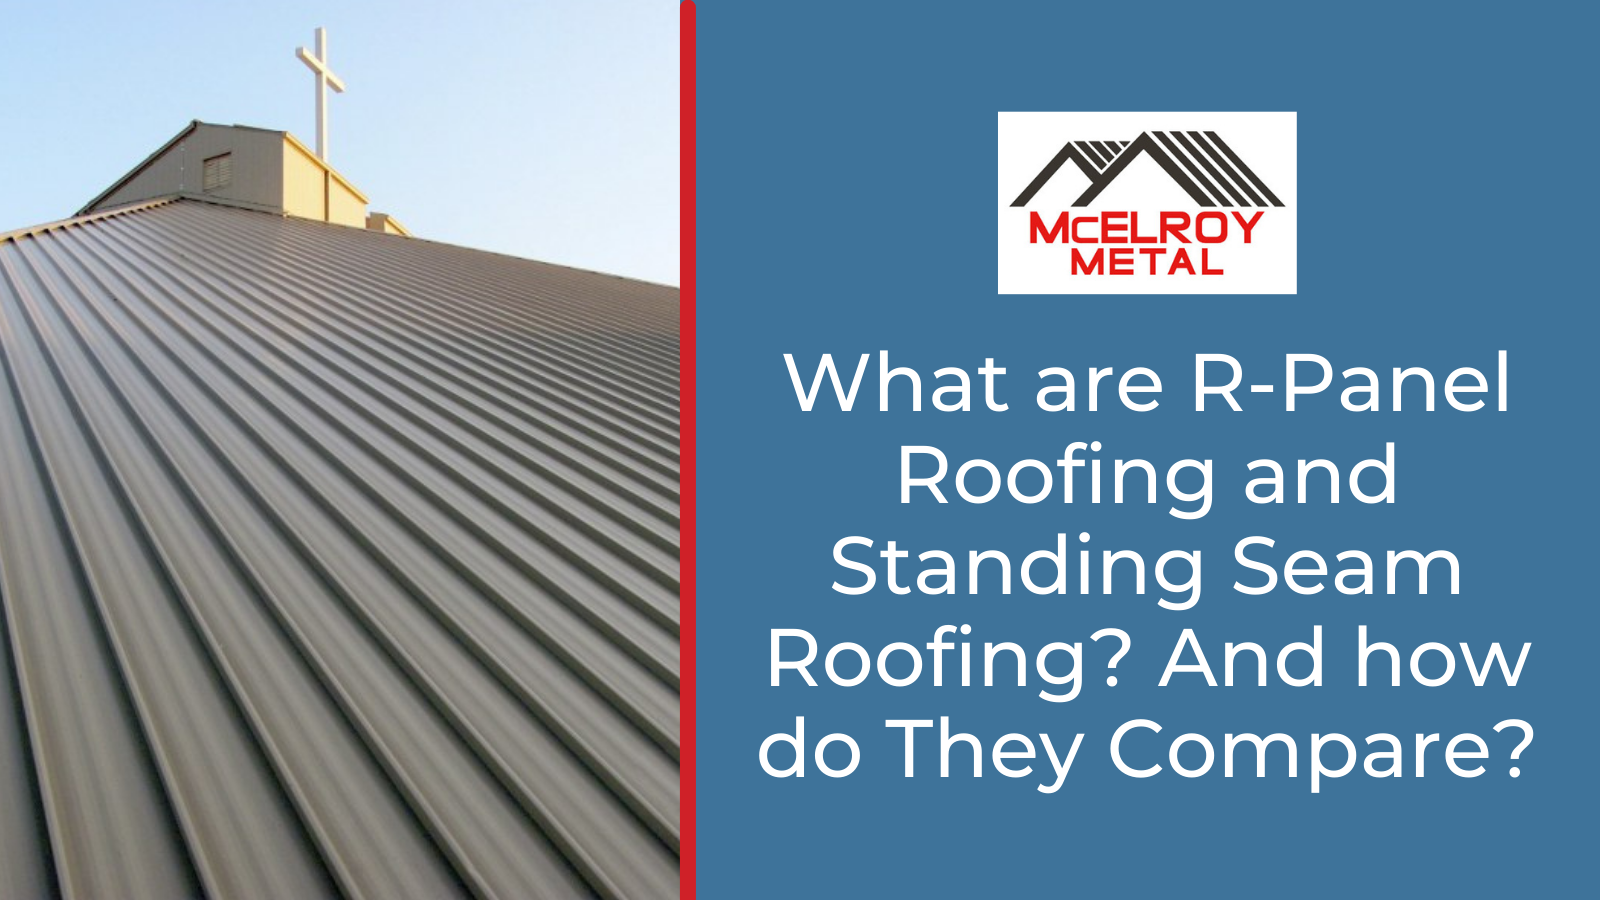 What are R-Panel Roofing and Standing Seam Roofing? And How Do They Compare?